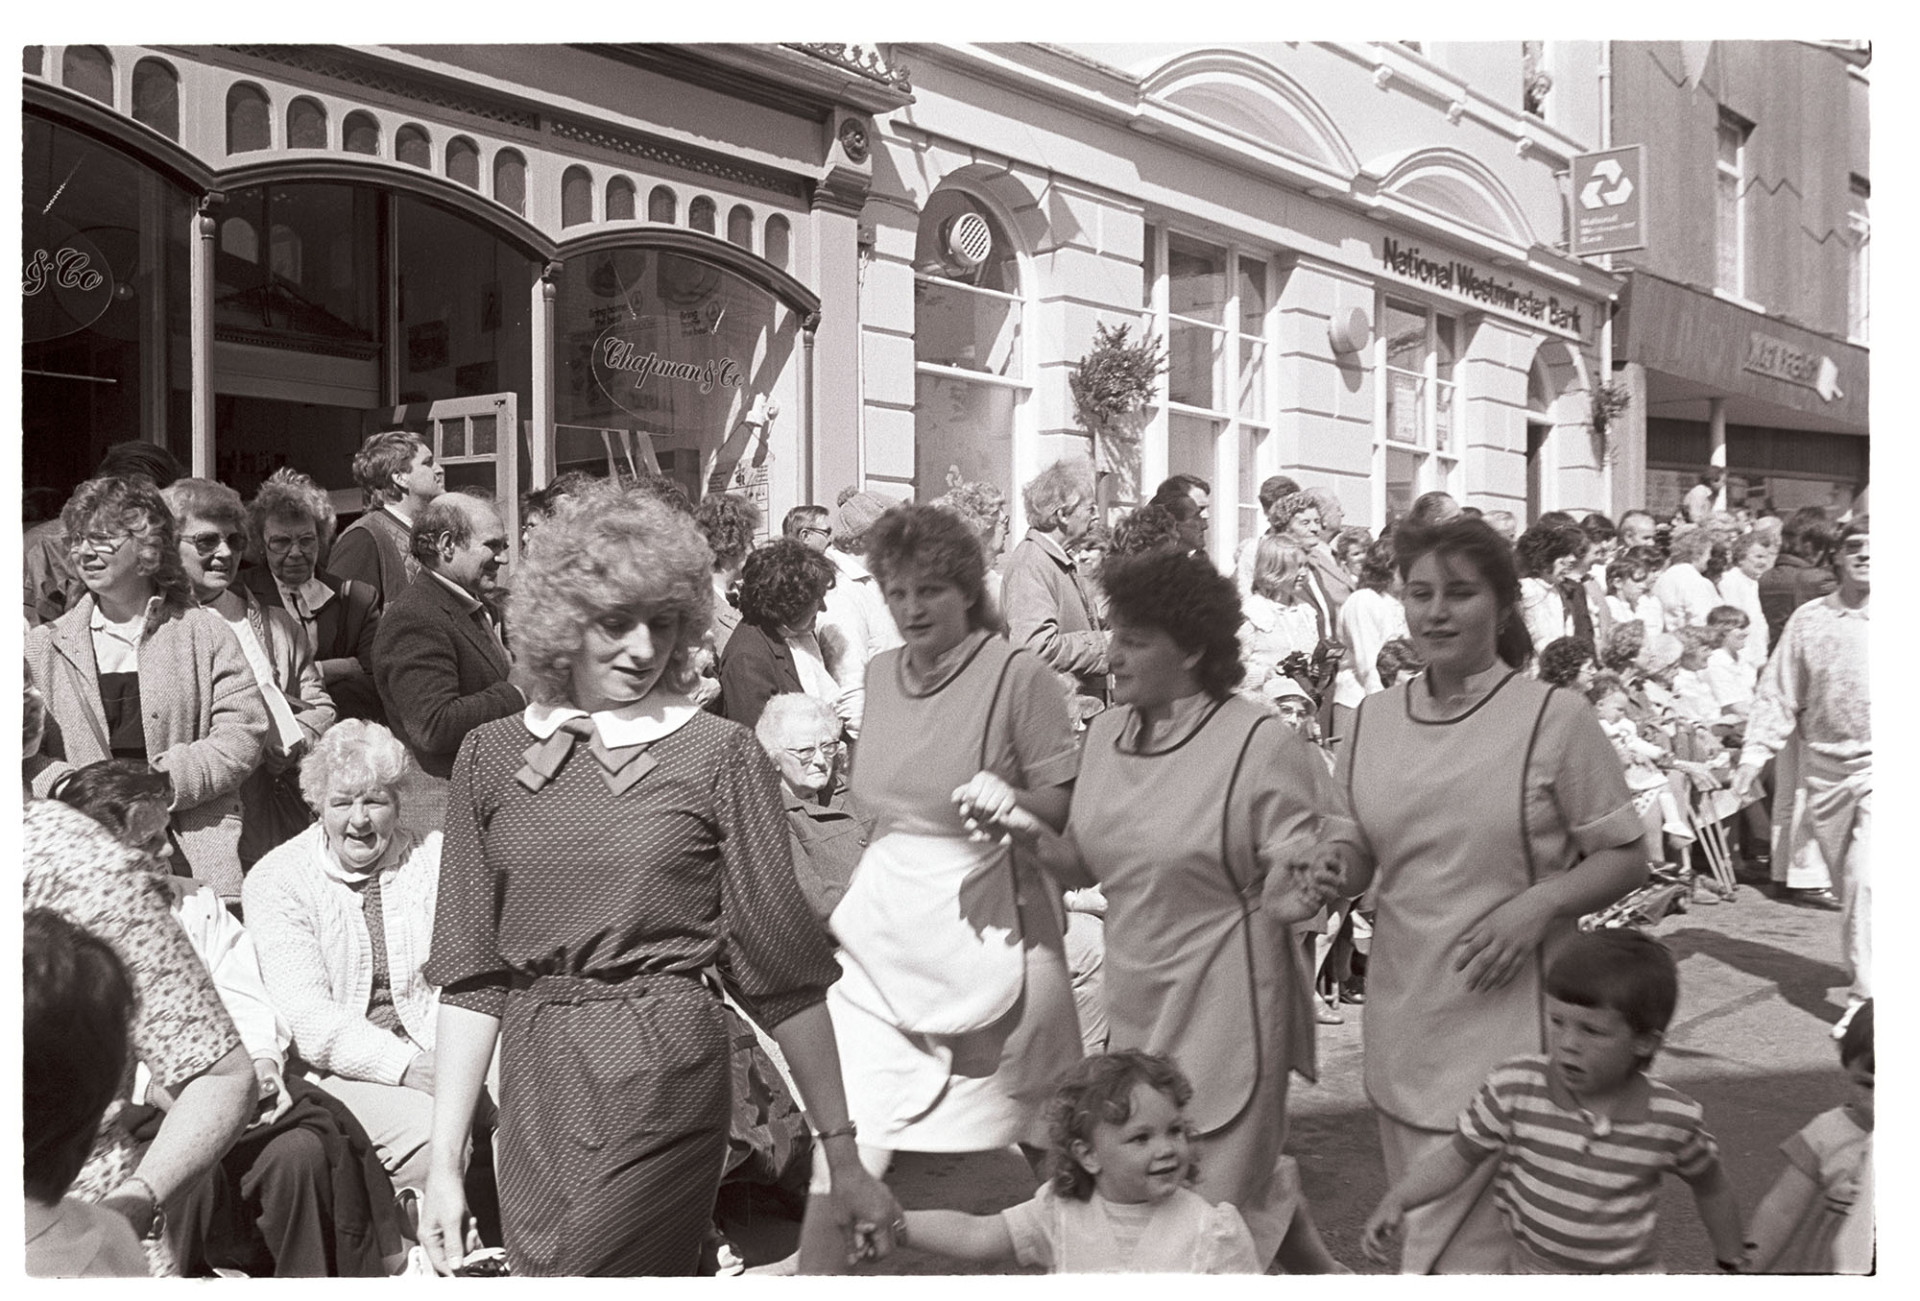 May Fair celebrations, dancing in the street, three women in working overalls.
[Three women in overalls or aprons dancing in the High Street at the May Fair celebrations in Great Torrington. In front of them is a woman with three small children. Spectators are watching the May Fair parade from the side of the street outside shop fronts.]